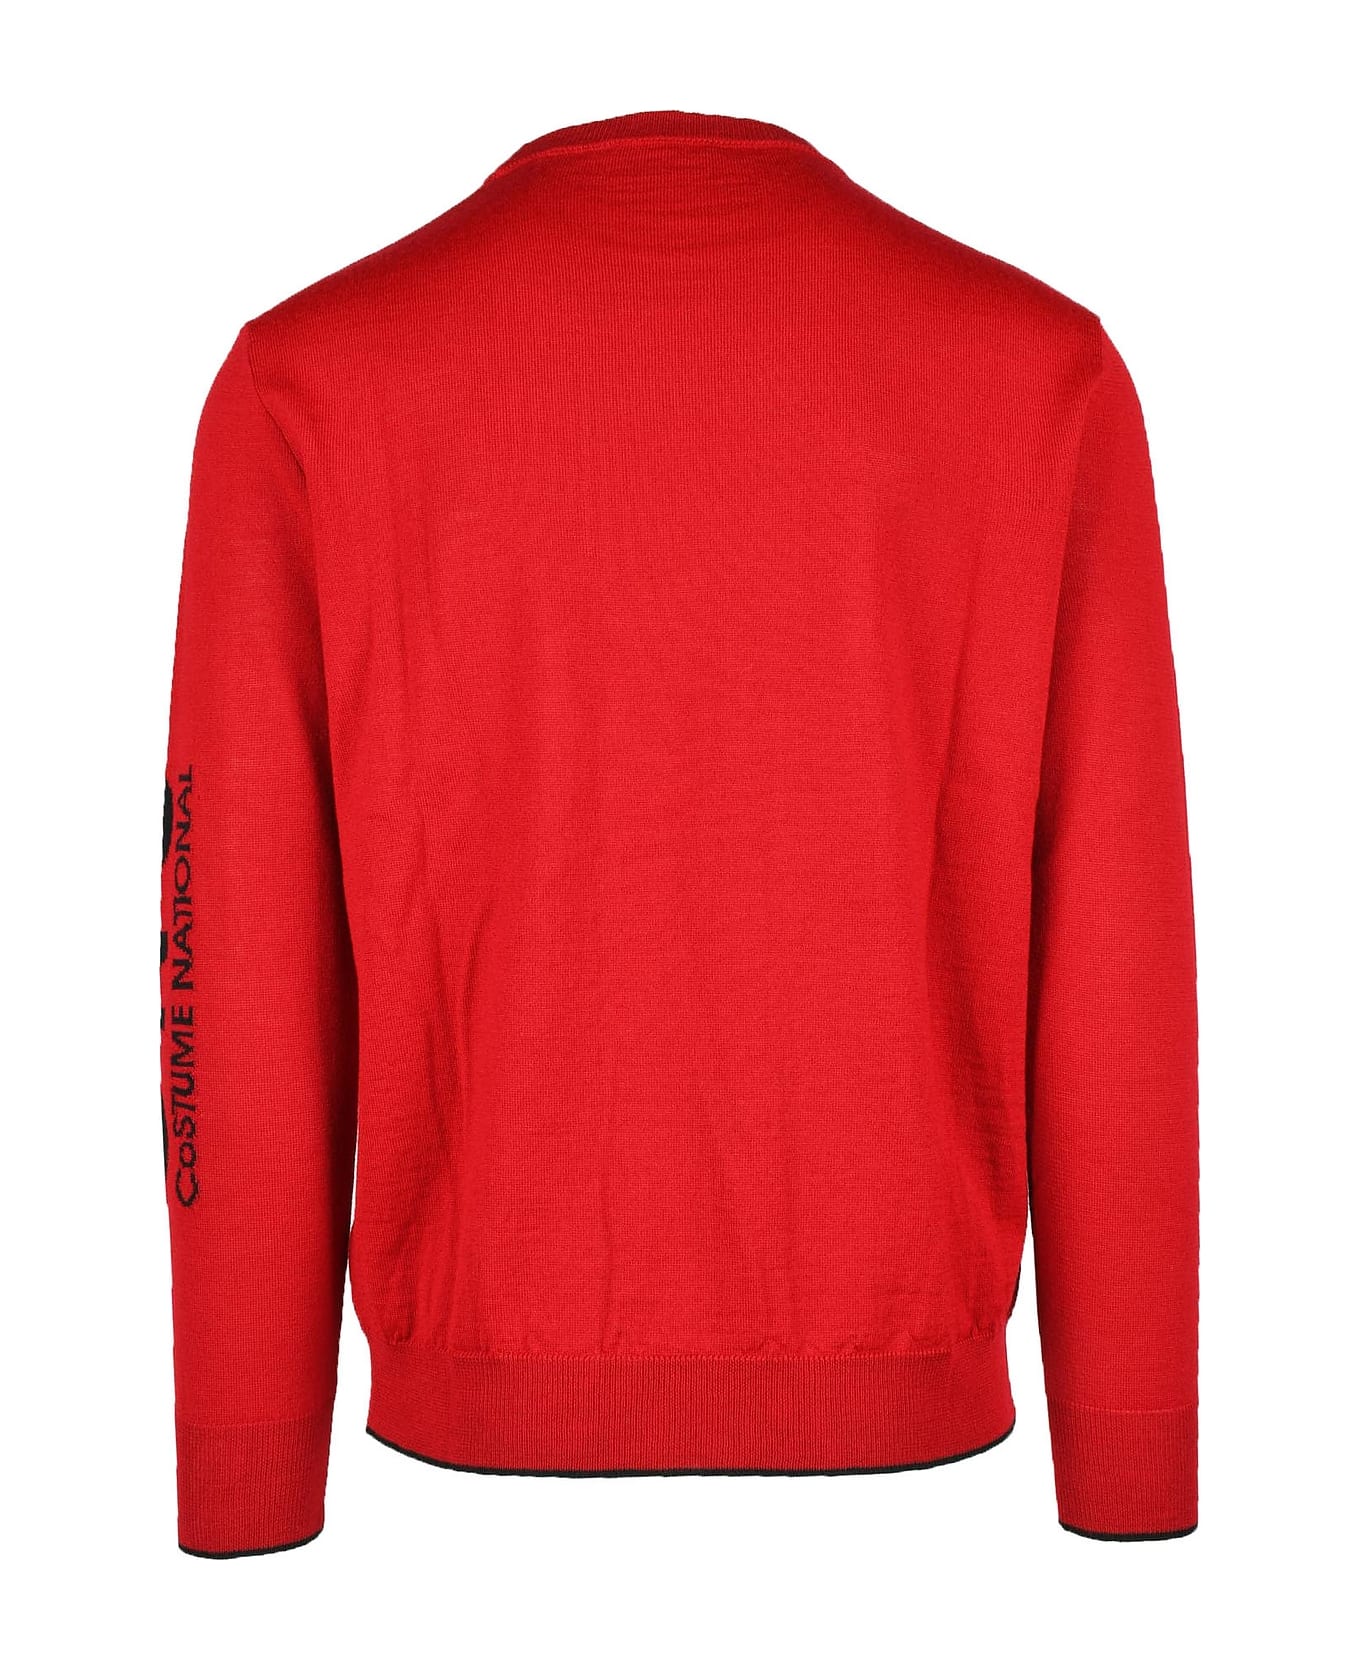 CoSTUME NATIONAL CONTEMPORARY Men's Red Sweater - Red